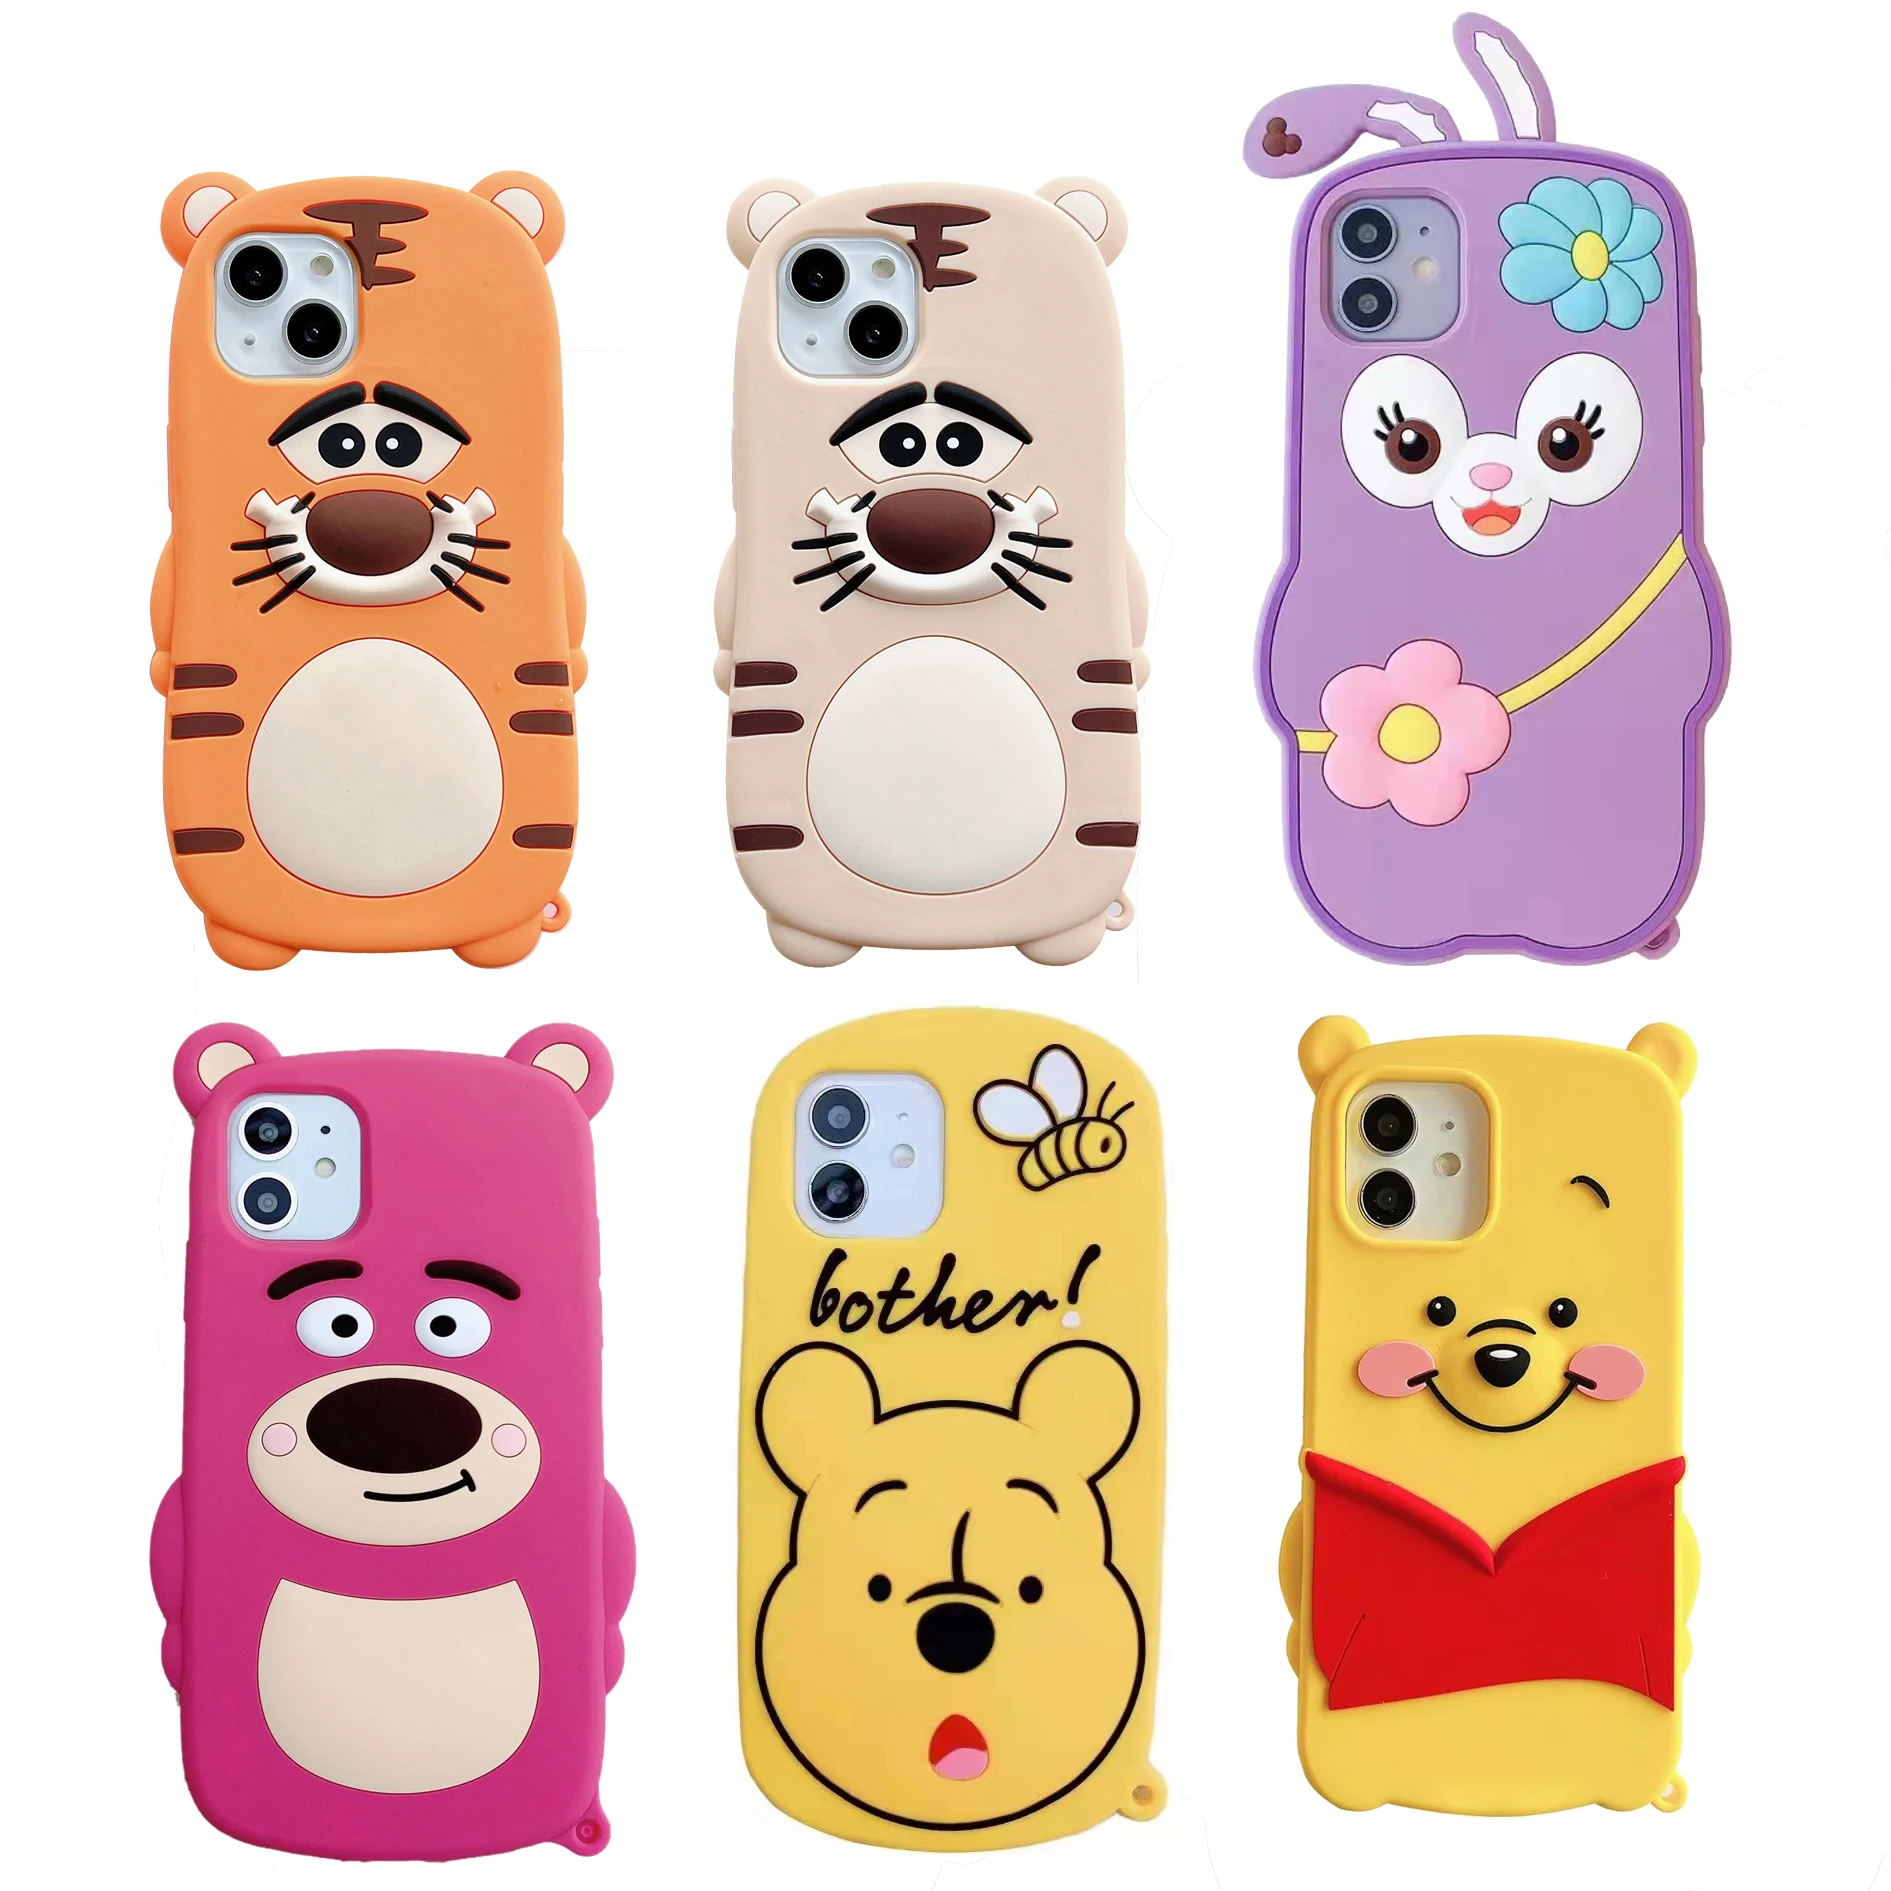 3d Cute Cartoon Dog Phone Case For Iphone 12 Pro Max 11 Xr Xs 7 8 Plus 6 6s  Se 2020 Animal Silicone Soft Cover - Buy Cute Case For Iphone Xs,Cartoon